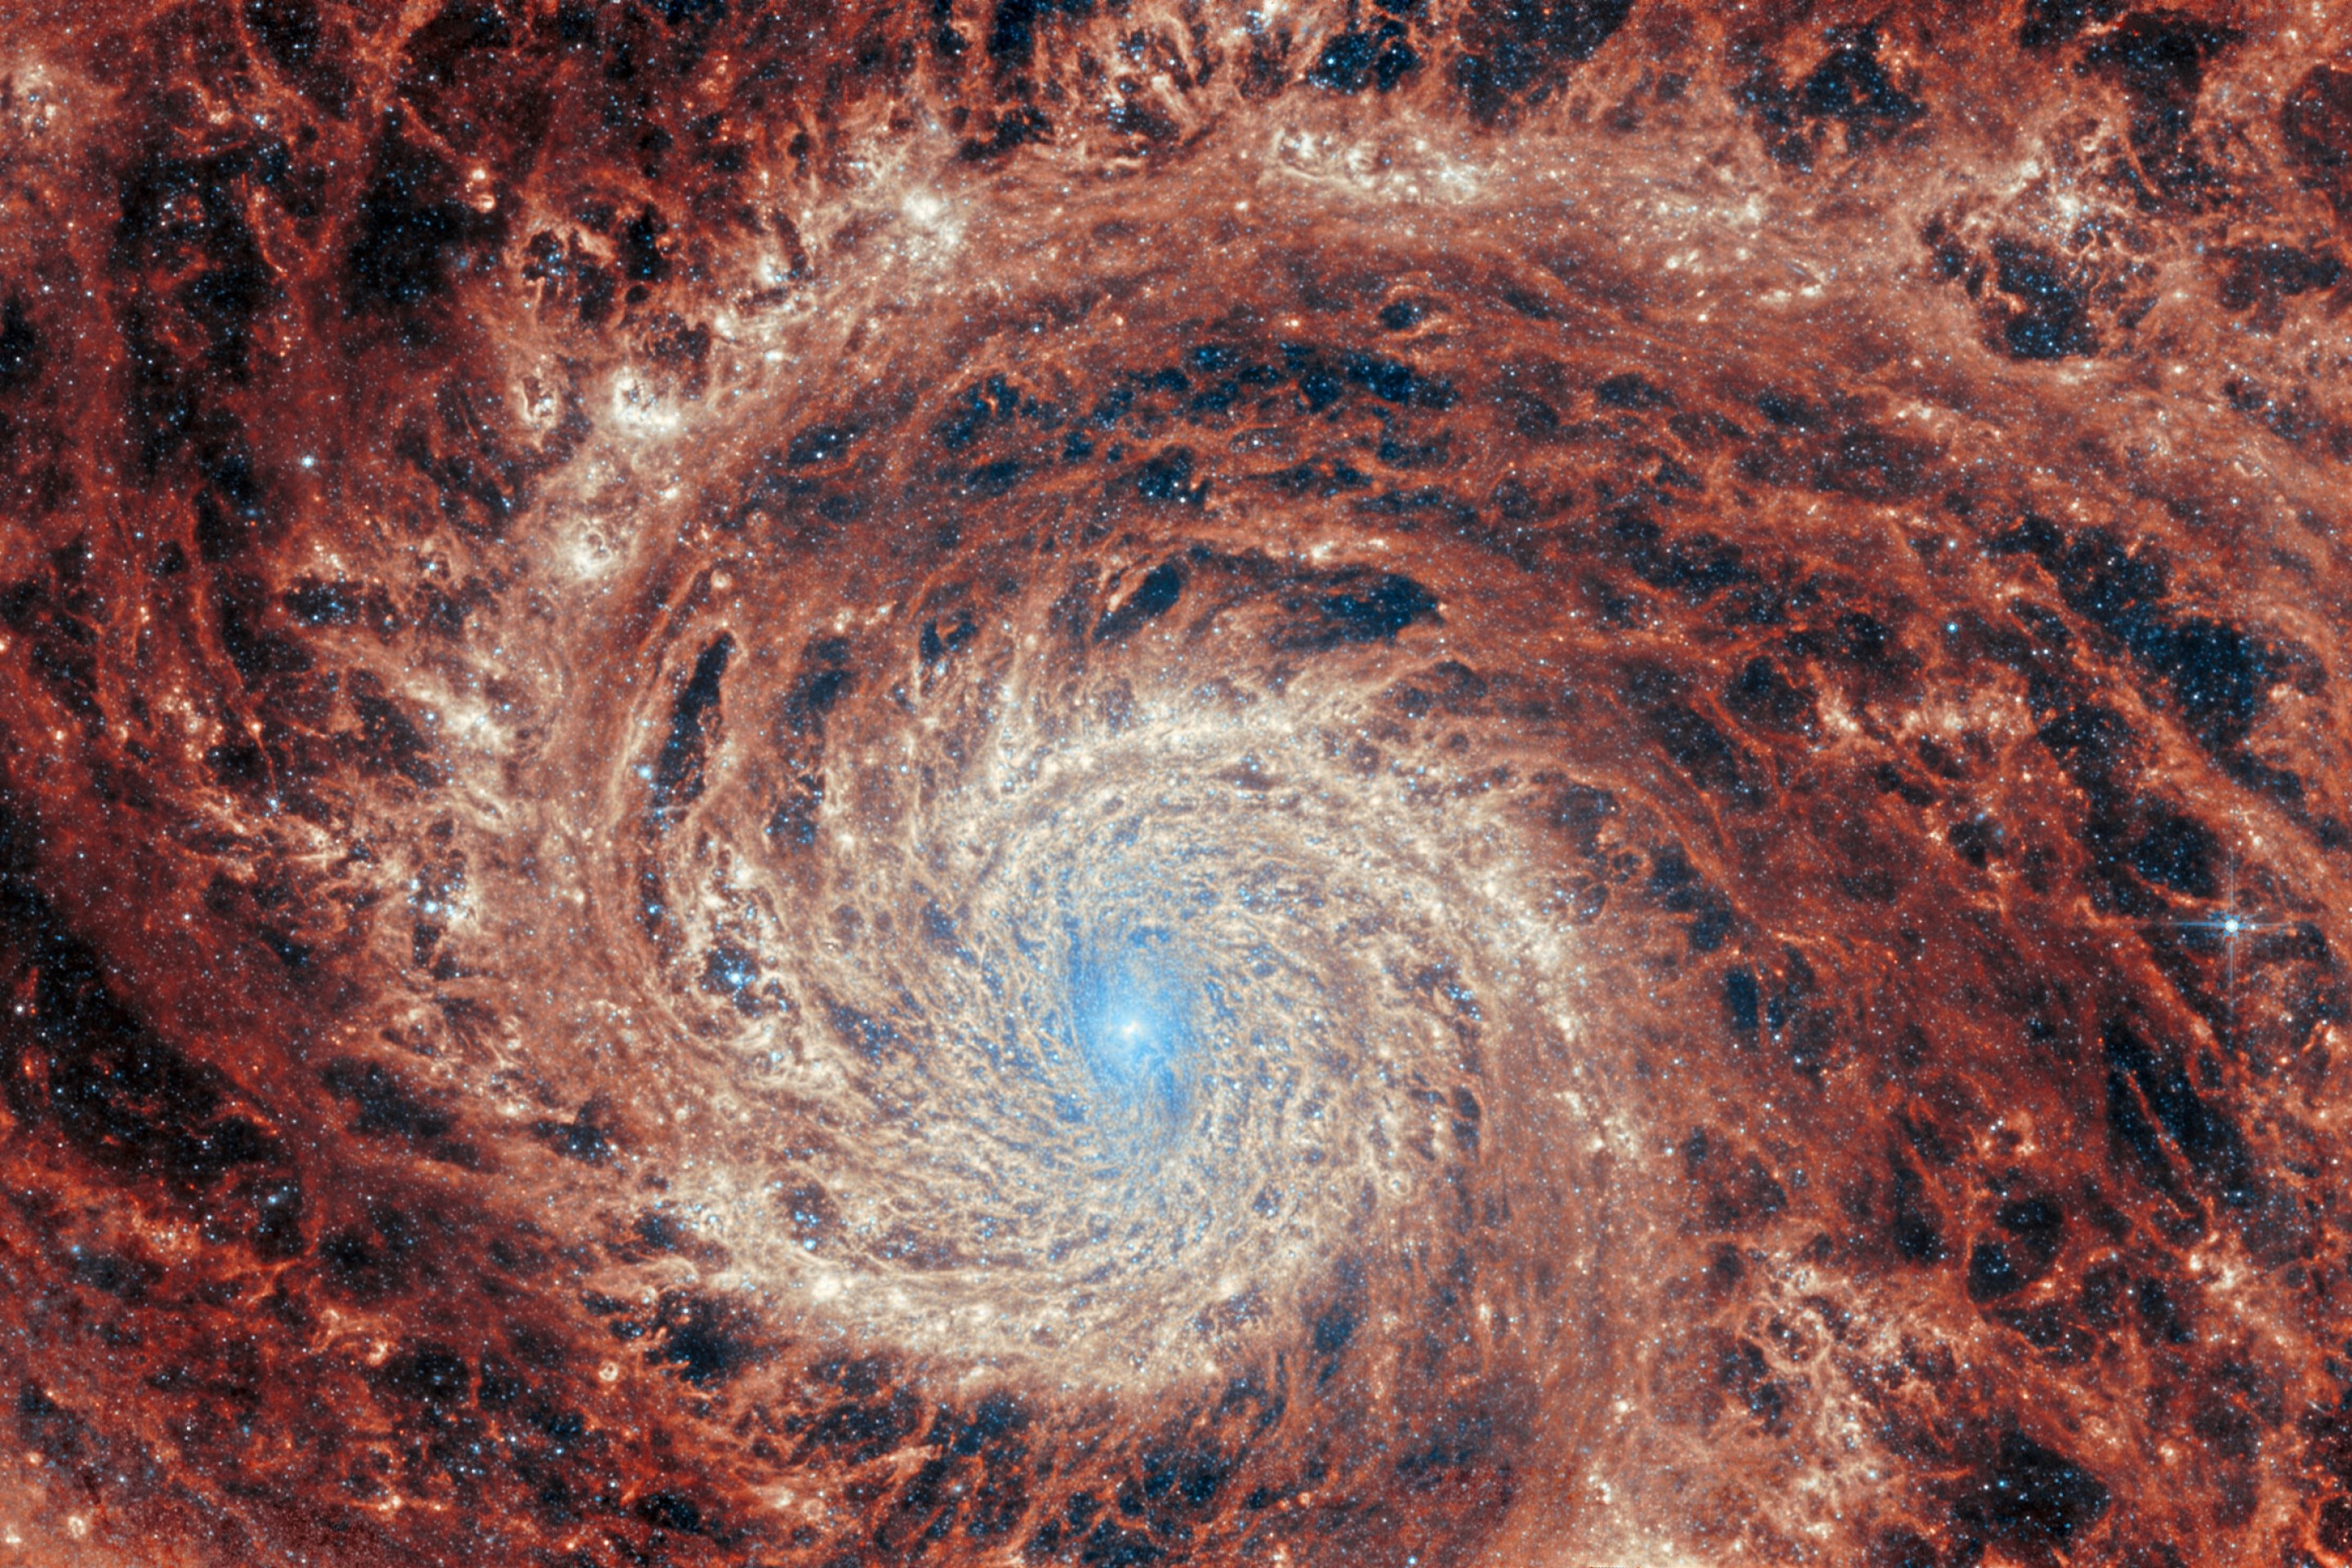 The graceful winding arms of the grand-design spiral galaxy M51 stretch across this image from the NASA/ESA/CSA James Webb Space Telescope. Unlike the menagerie of weird and wonderful spiral galaxies with ragged or disrupted spiral arms, grand-design spiral galaxies boast prominent, well-developed spiral arms like the ones showcased in this image. This galactic portrait was captured by Webb’s Mid-InfraRed Instrument (MIRI). In this image the reprocessed stellar light by dust grains and molecules in the medium of the galaxy illuminate a dramatic filamentary medium. Empty cavities and bright filaments alternate and give the impression of ripples propagating from the spiral arms. The yellow compact regions indicate the newly formed star clusters in the galaxy. M51 — also known as NGC 5194 — lies about 27 million light-years away from Earth in the constellation Canes Venatici, and is trapped in a tumultuous relationship with its near neighbour, the dwarf galaxy NGC 5195. The interaction between these two galaxies has made these galactic neighbours one of the better-studied galaxy pairs in the night sky. The gravitational influence of M51’s smaller companion is thought to be partially responsible for the stately nature of the galaxy’s prominent and distinct spiral arms. If you would like to learn more about this squabbling pair of galactic neighbours, you can explore earlier observations of M51 by the NASA/ESA Hubble Space Telescope here.  This Webb observation of M51 is one of a series of observations collectively titled Feedback in Emerging extrAgalactic Star clusTers, or FEAST. The FEAST observations were designed to shed light on the interplay between stellar feedback and star formation in environments outside of our own galaxy, the Milky Way. Stellar feedback is the term used to describe the outpouring of energy from stars into the environments which form them, and is a crucial process in determining the rates at which stars form. Understanding stellar feedback is vital to building accurate universal models of star formation. The aim of the FEAST observations is to discover and study stellar nurseries in galaxies beyond our own Milky Way. Before Webb became operative, other observatories such as the Atacama Large Millimetre Array in the Chilean desert and Hubble have given us a glimpse of star formation either at the onset (tracing the dense gas and dust clouds where stars will form) or after the stars have destroyed with their energy their natal gas and dust clouds. Webb is opening a new window into the early stages of star formation and stellar light, as well as the energy reprocessing of gas and dust. Scientists are seeing star clusters emerging from their natal cloud in galaxies beyond our local group for the first time. They will also be able to measure how long it takes for these stars to pollute with newly formed metals and to clean out the gas (these time scales are different from galaxy to galaxy). By studying these processes, we will better understand how the star formation cycle and metal enrichment are regulated within galaxies as well as what are the time scales for planets and brown dwarfs to form. Once dust and gas is removed from the newly formed stars, there is no material left to form planets. [Image Description: A large spiral galaxy takes up the entirety of the image. The core is mostly bright white, but there are also swirling, detailed structures that resemble water circling a drain. There is white and pale blue light that emanates from stars and dust at the core’s centre, but it is tightly limited to the core. The detailed rings feature bands of deep orange and cloudy grey, which are interspersed by darker empty regions throughout.]